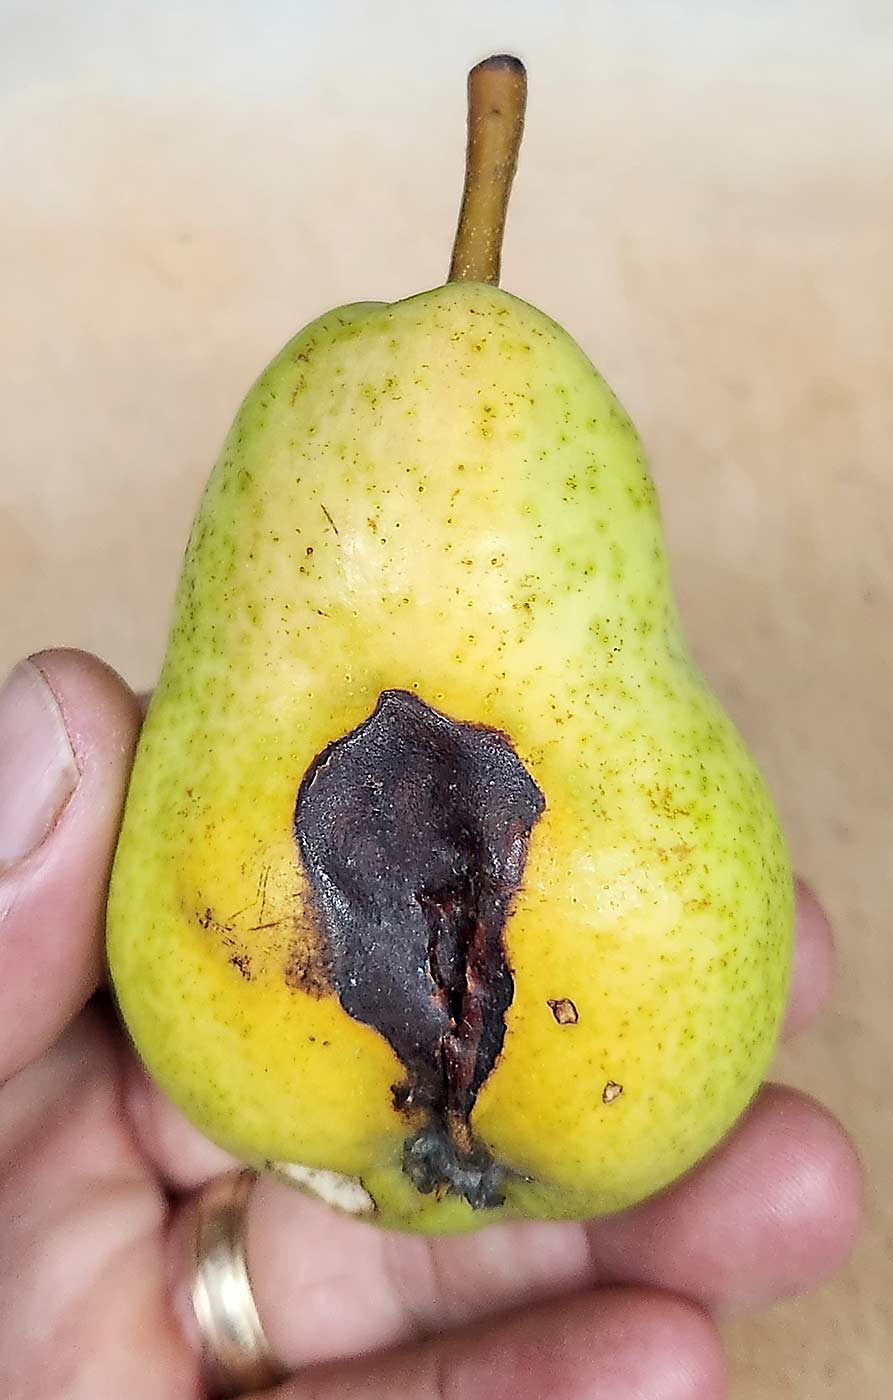 California entomologists are investigating what might be the Pacific flatheaded borer causing pear damage somewhat similar in appearance to codling moth damage and sun damage. (Courtesy Clebson Gonçalves/University of California Cooperative Extension)